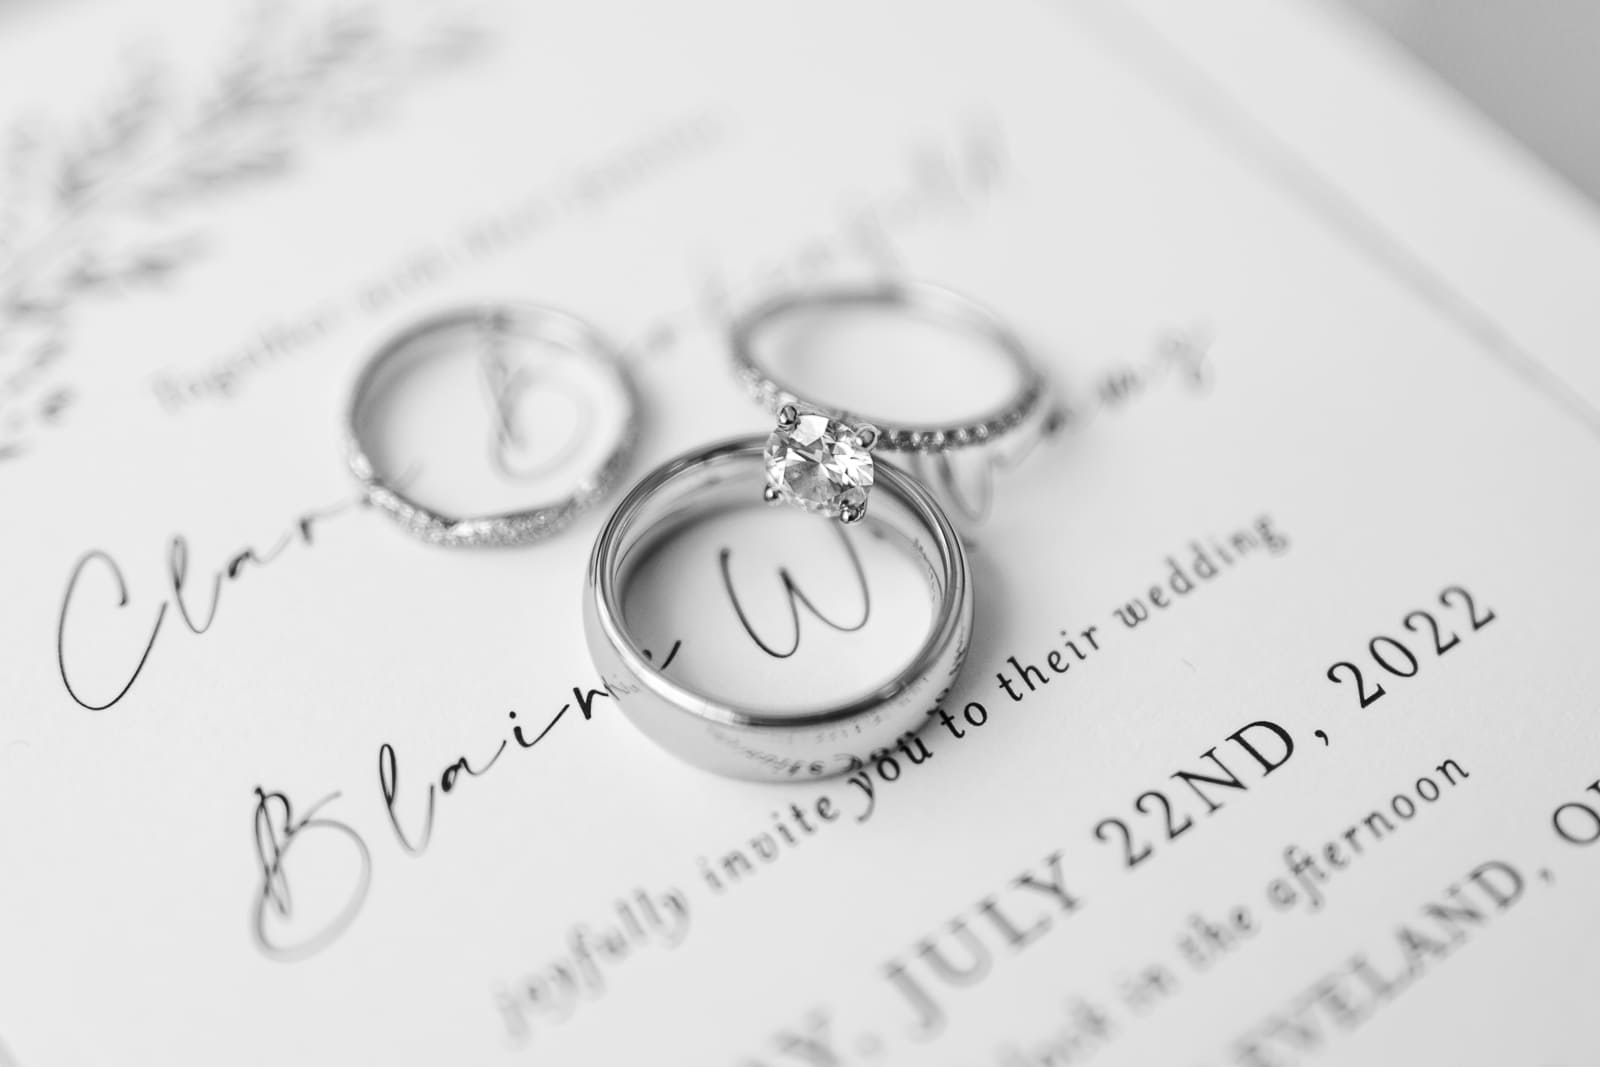 Detail photo of wedding rings and engagement ring on wedding invitation in black and white